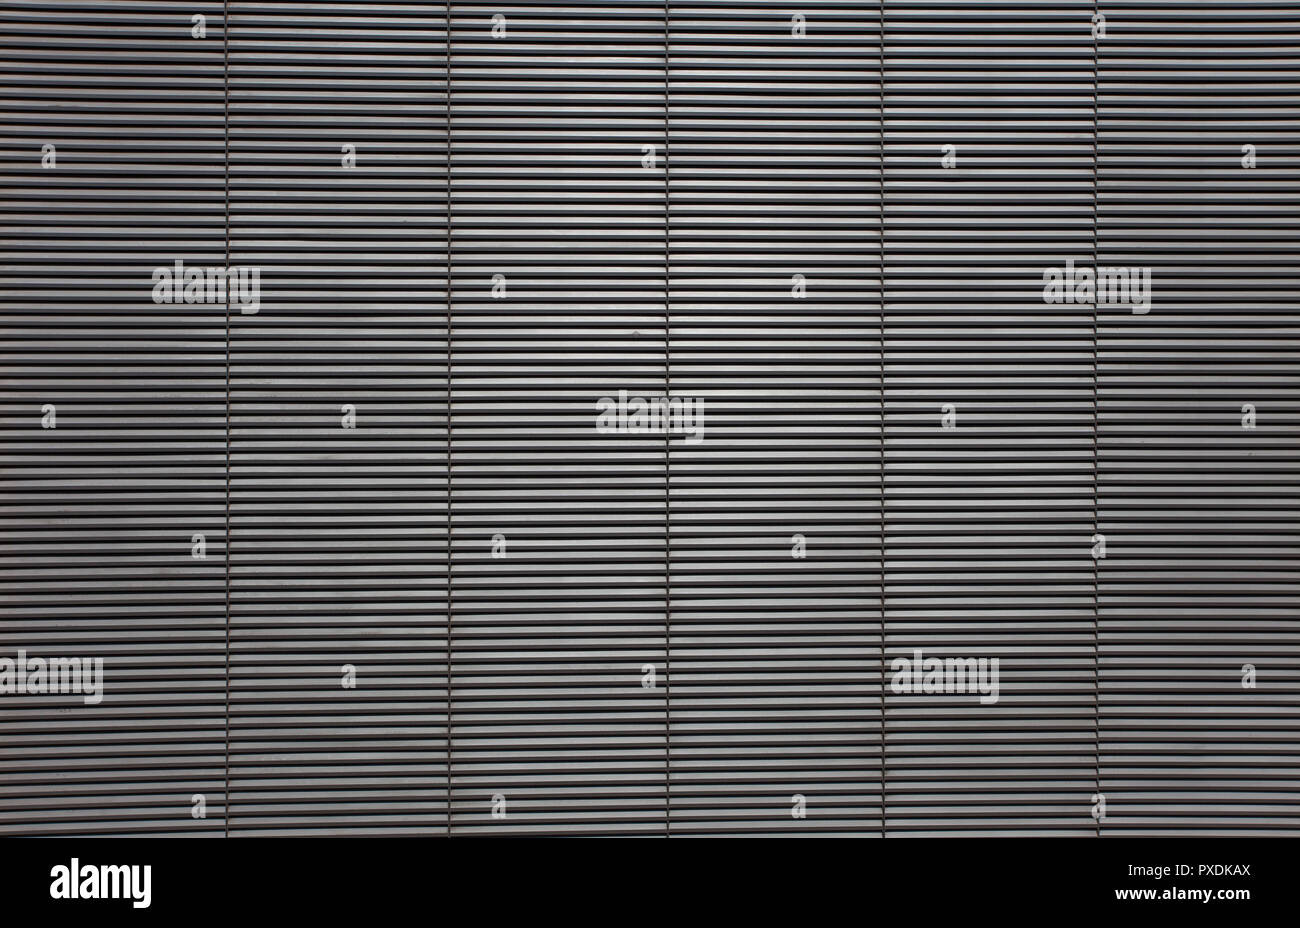 texture of metal vent grill on wall Stock Photo